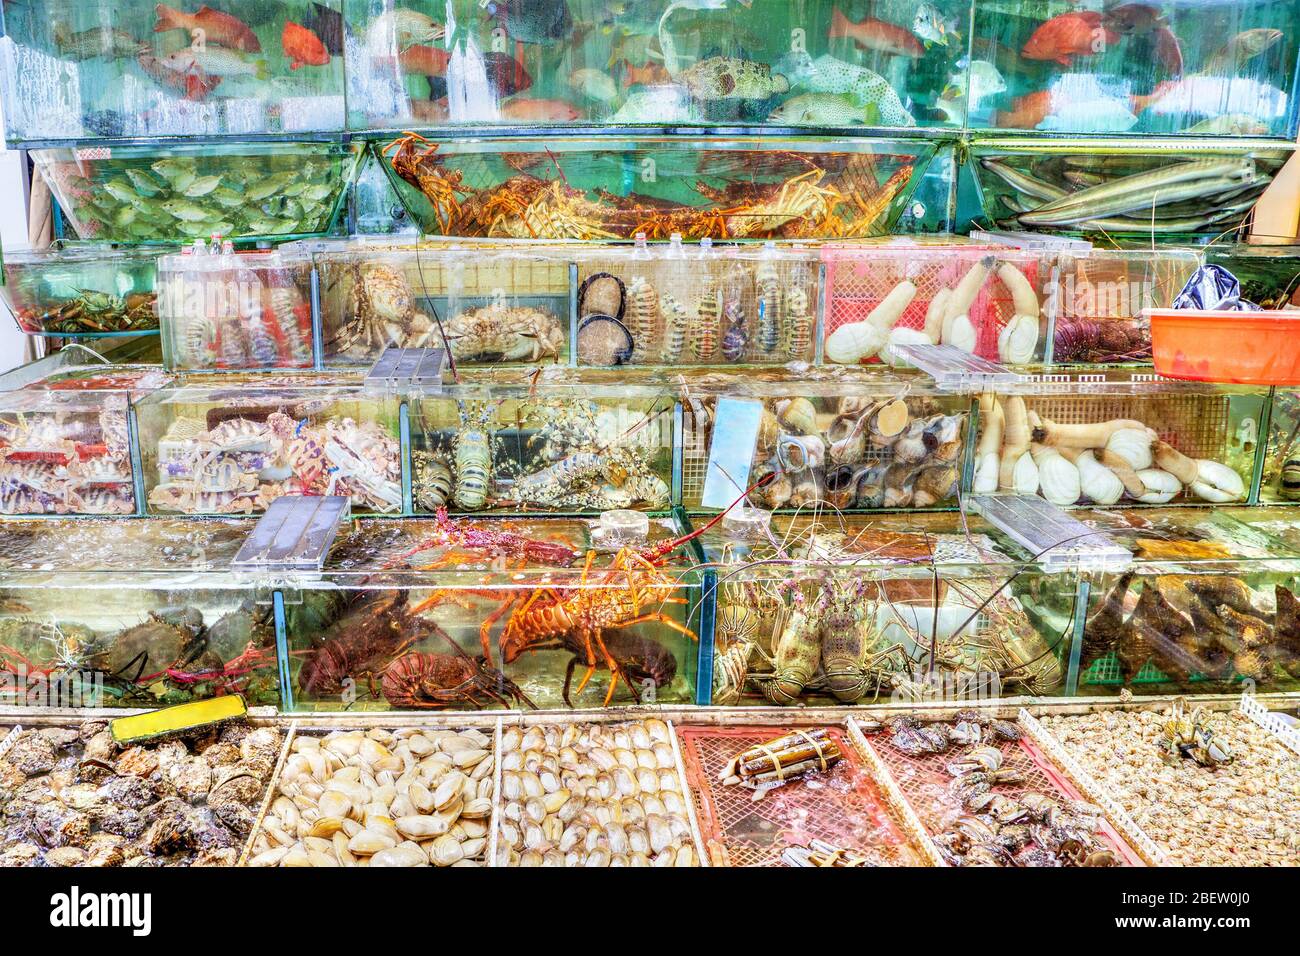 Fish, lobsters, crabs and other mollusk seafood are crammed into fish tanks at the seafood market in Sai Kung, Hong Kong. Sai Kung village is famous f Stock Photo